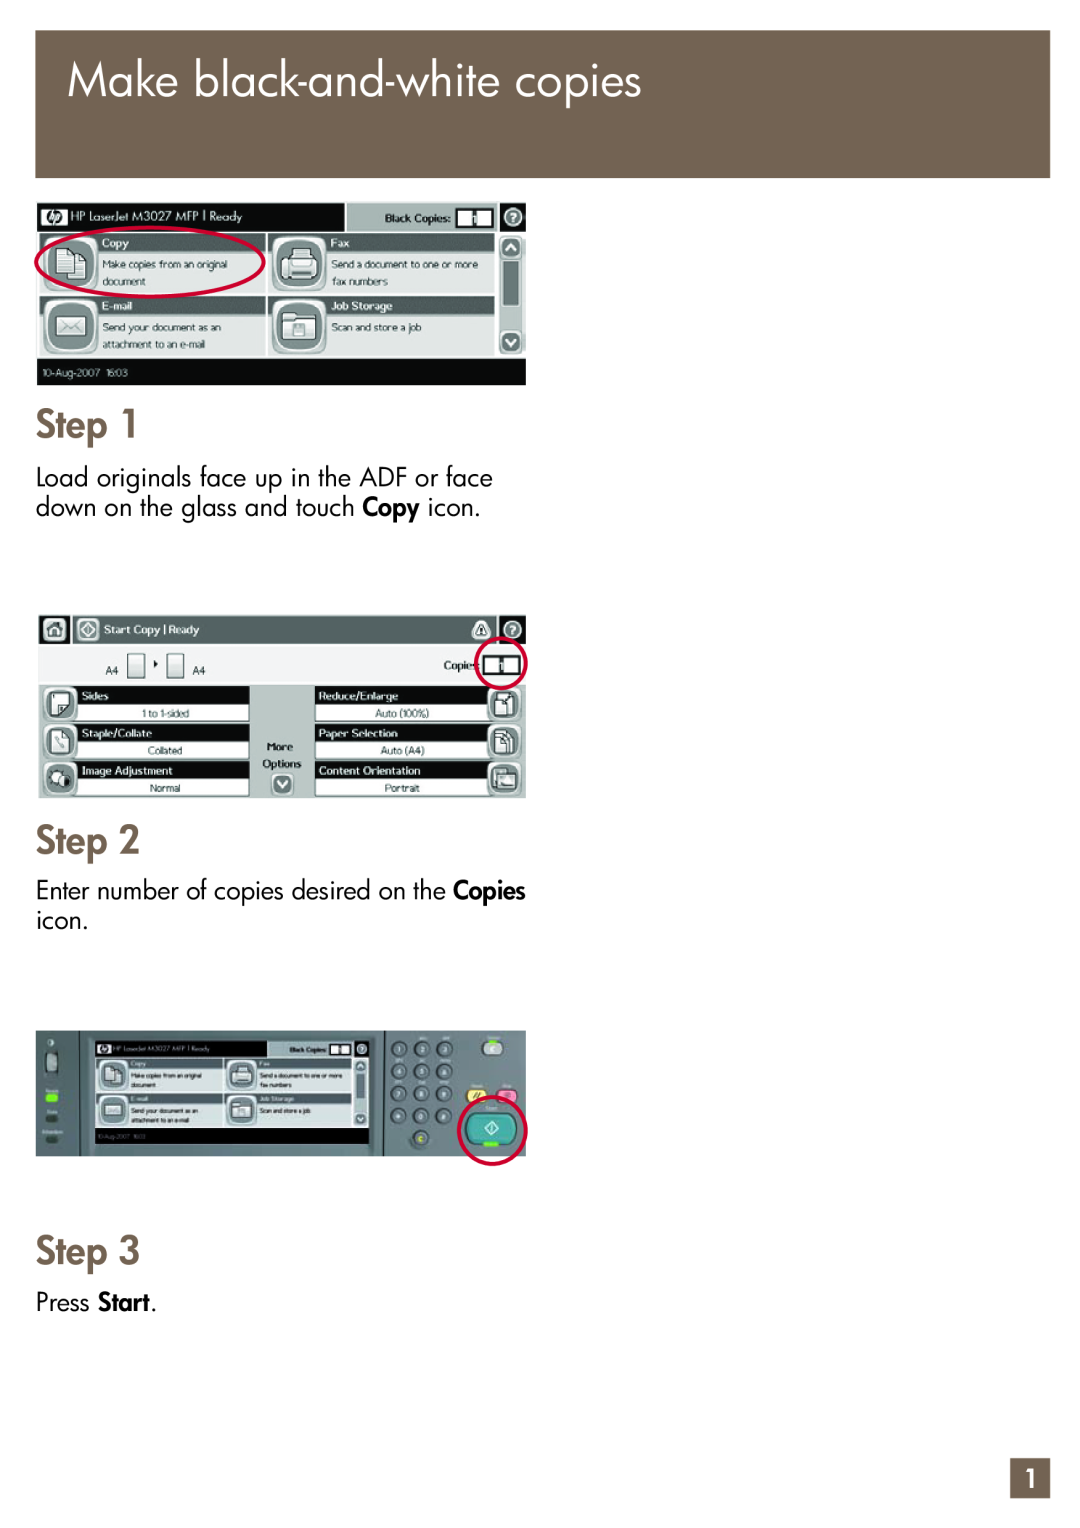 HP M3027x manual Make black-and-white copies, Step, Enter number of copies desired on the Copies icon, Press Start 